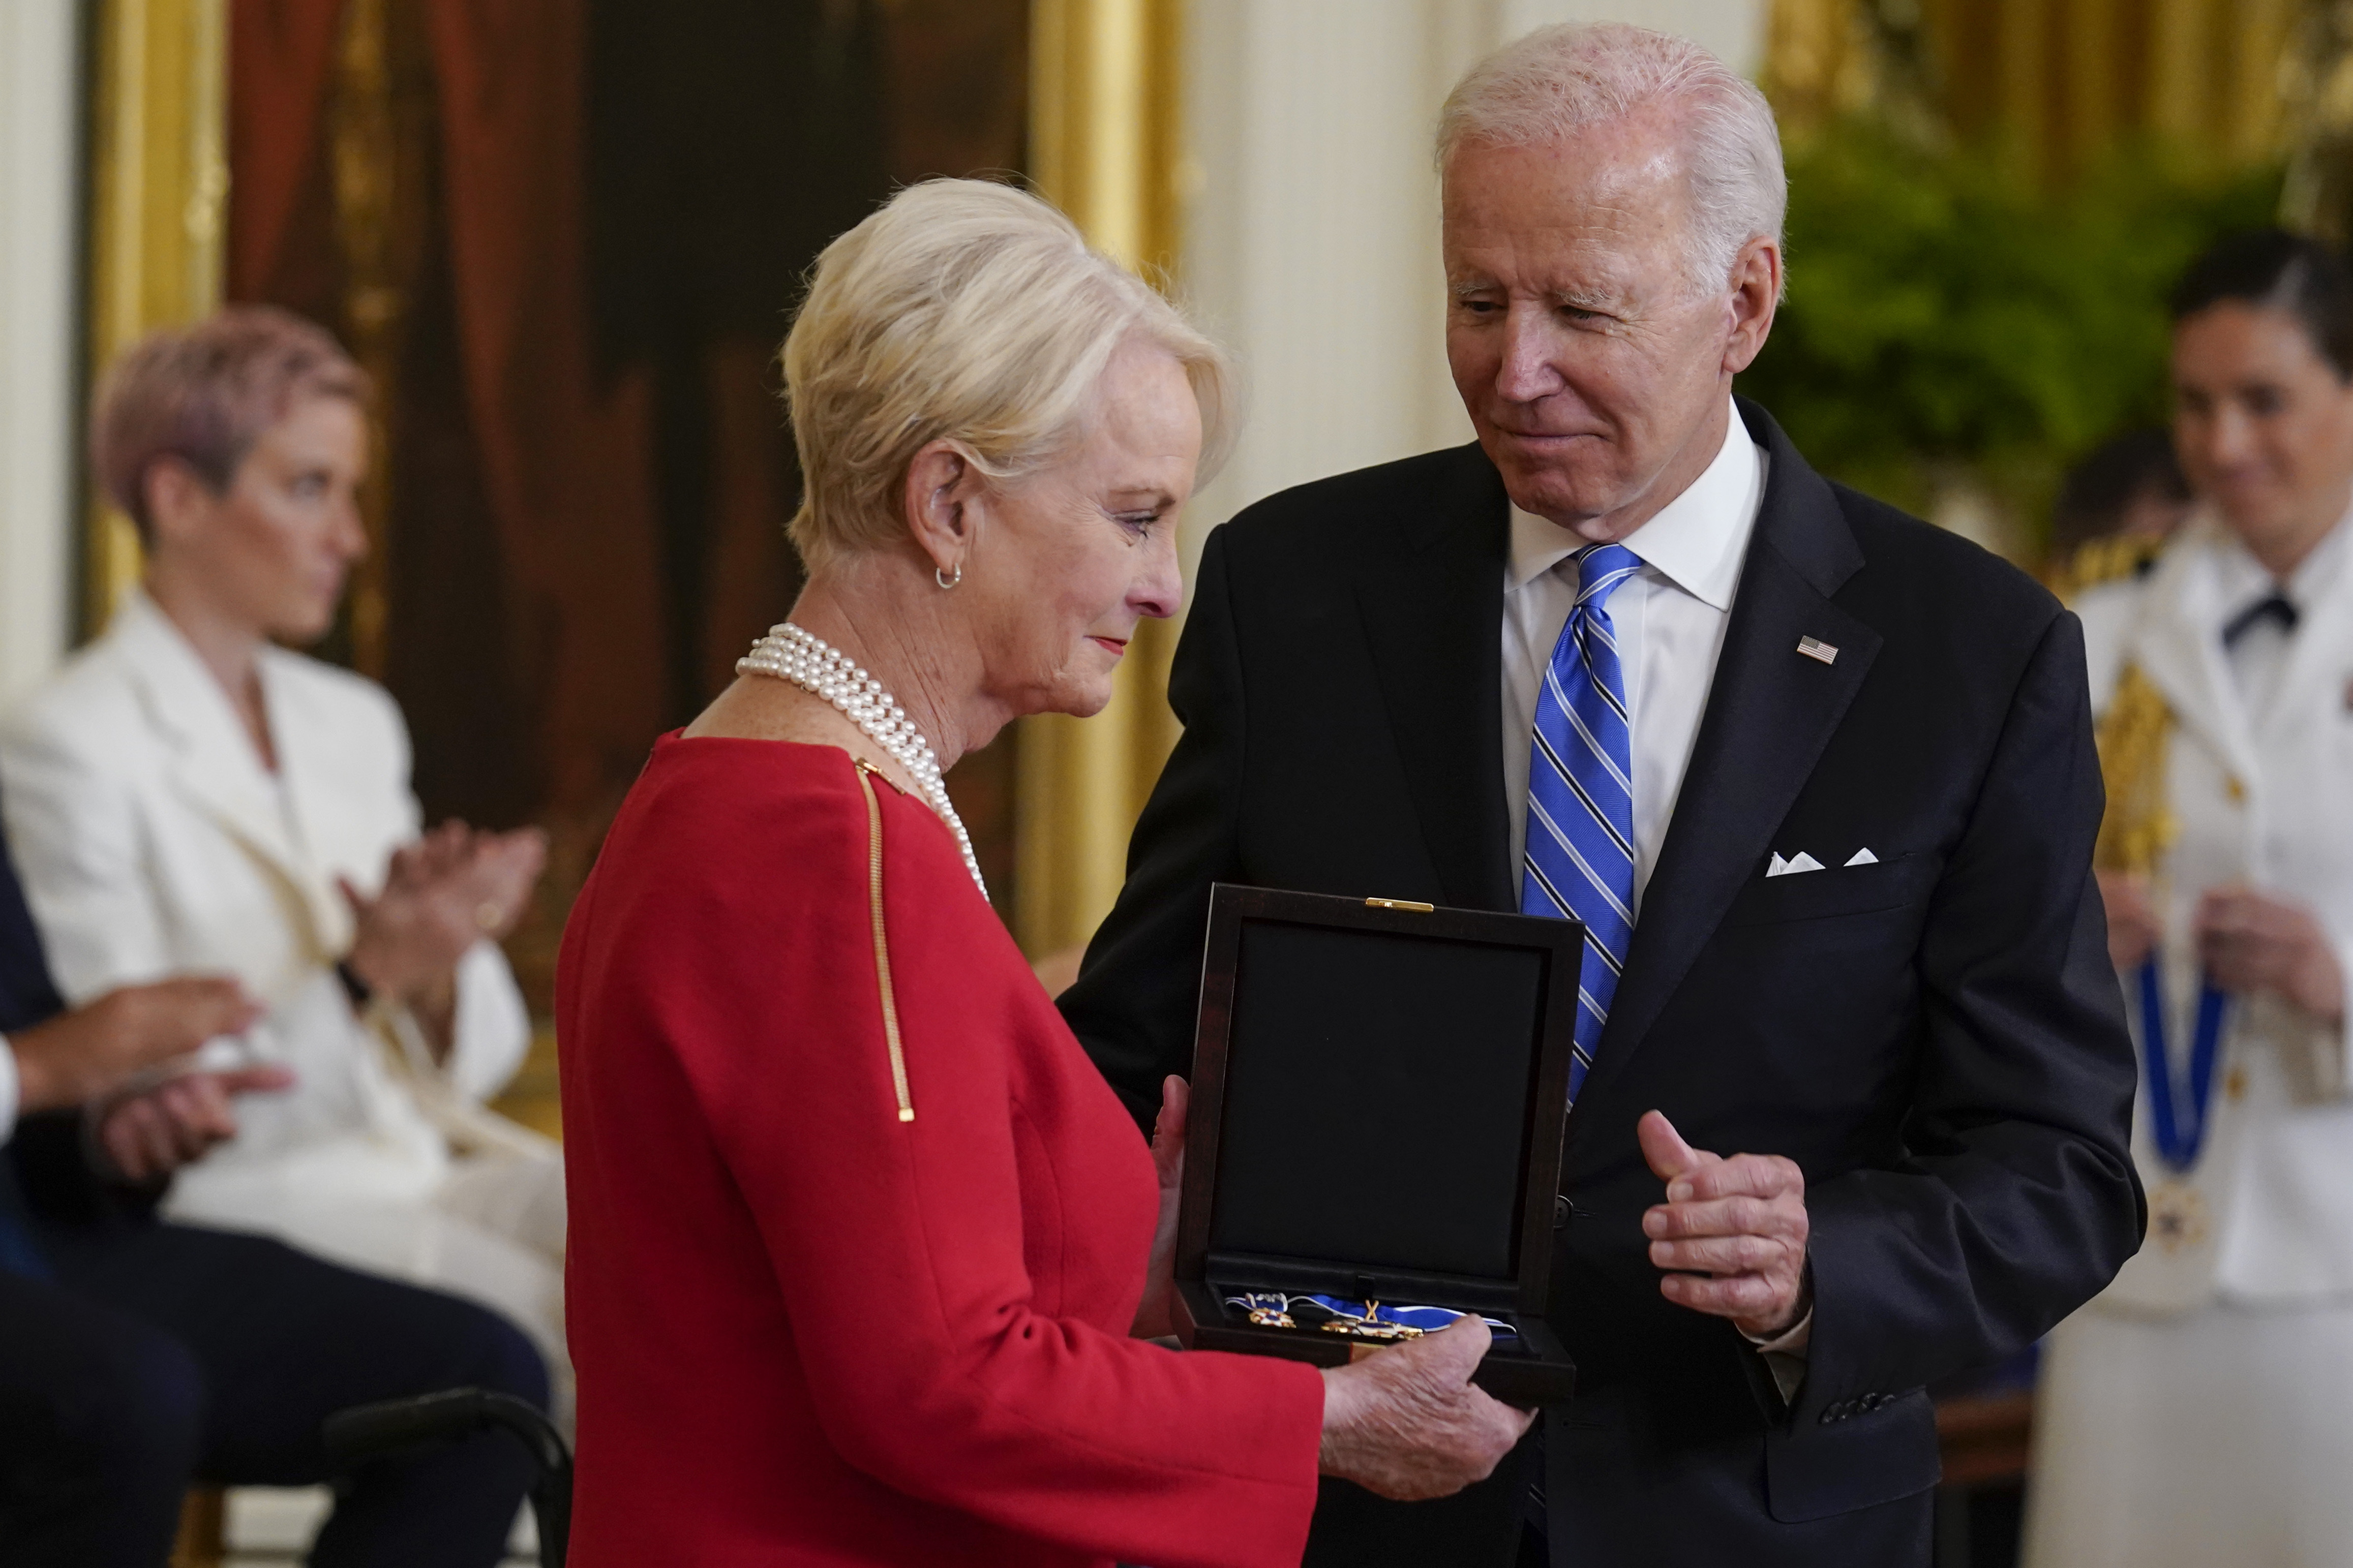 President Joe Biden posthumously awards the nation's highest civilian honor, the Presidential Medal of Freedom, to Sen. John McCain of Arizona as his wife Cindy McCain accepts the award during a ceremony in the East Room of the White House in Washington, Thursday, July 7, 2022. (AP Photo/J. Scott Applewhite)